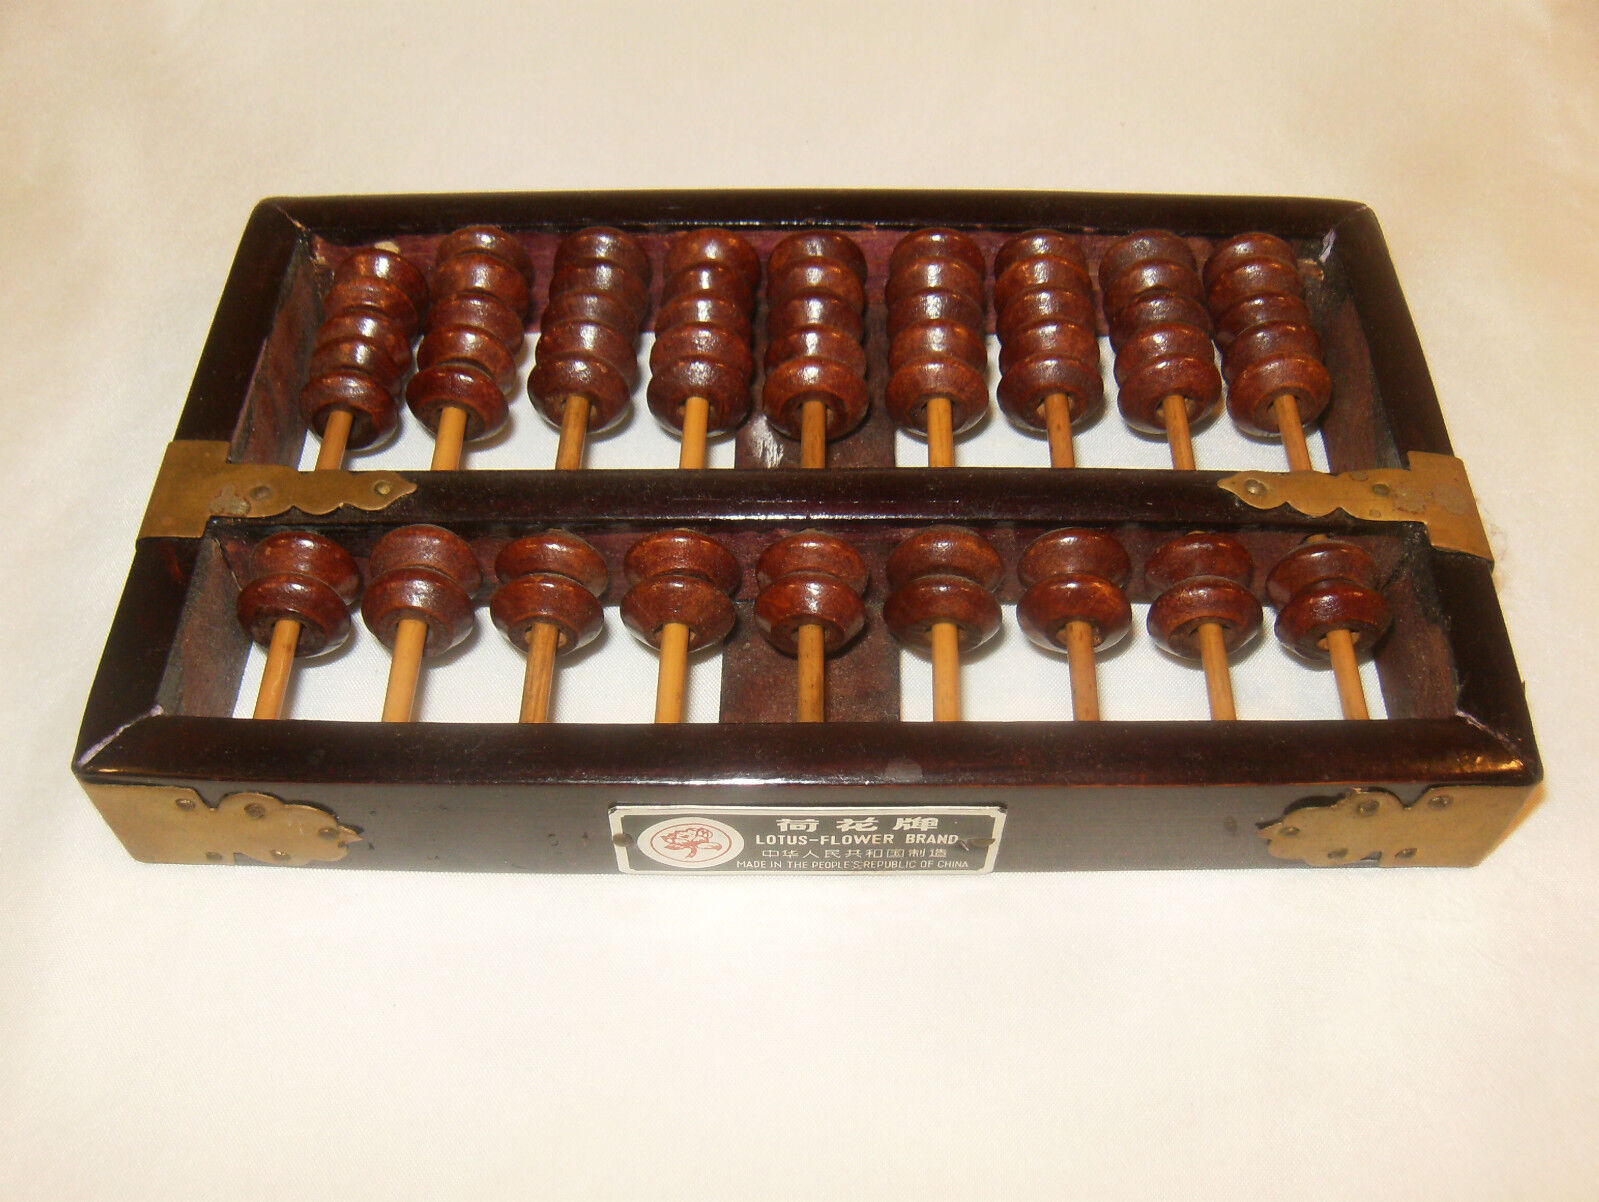 Vintage CHINESE ROSEWOOD AND BRASS ABACUS LOTUS FLOWER BRAND -9 RODS 63 BEADS